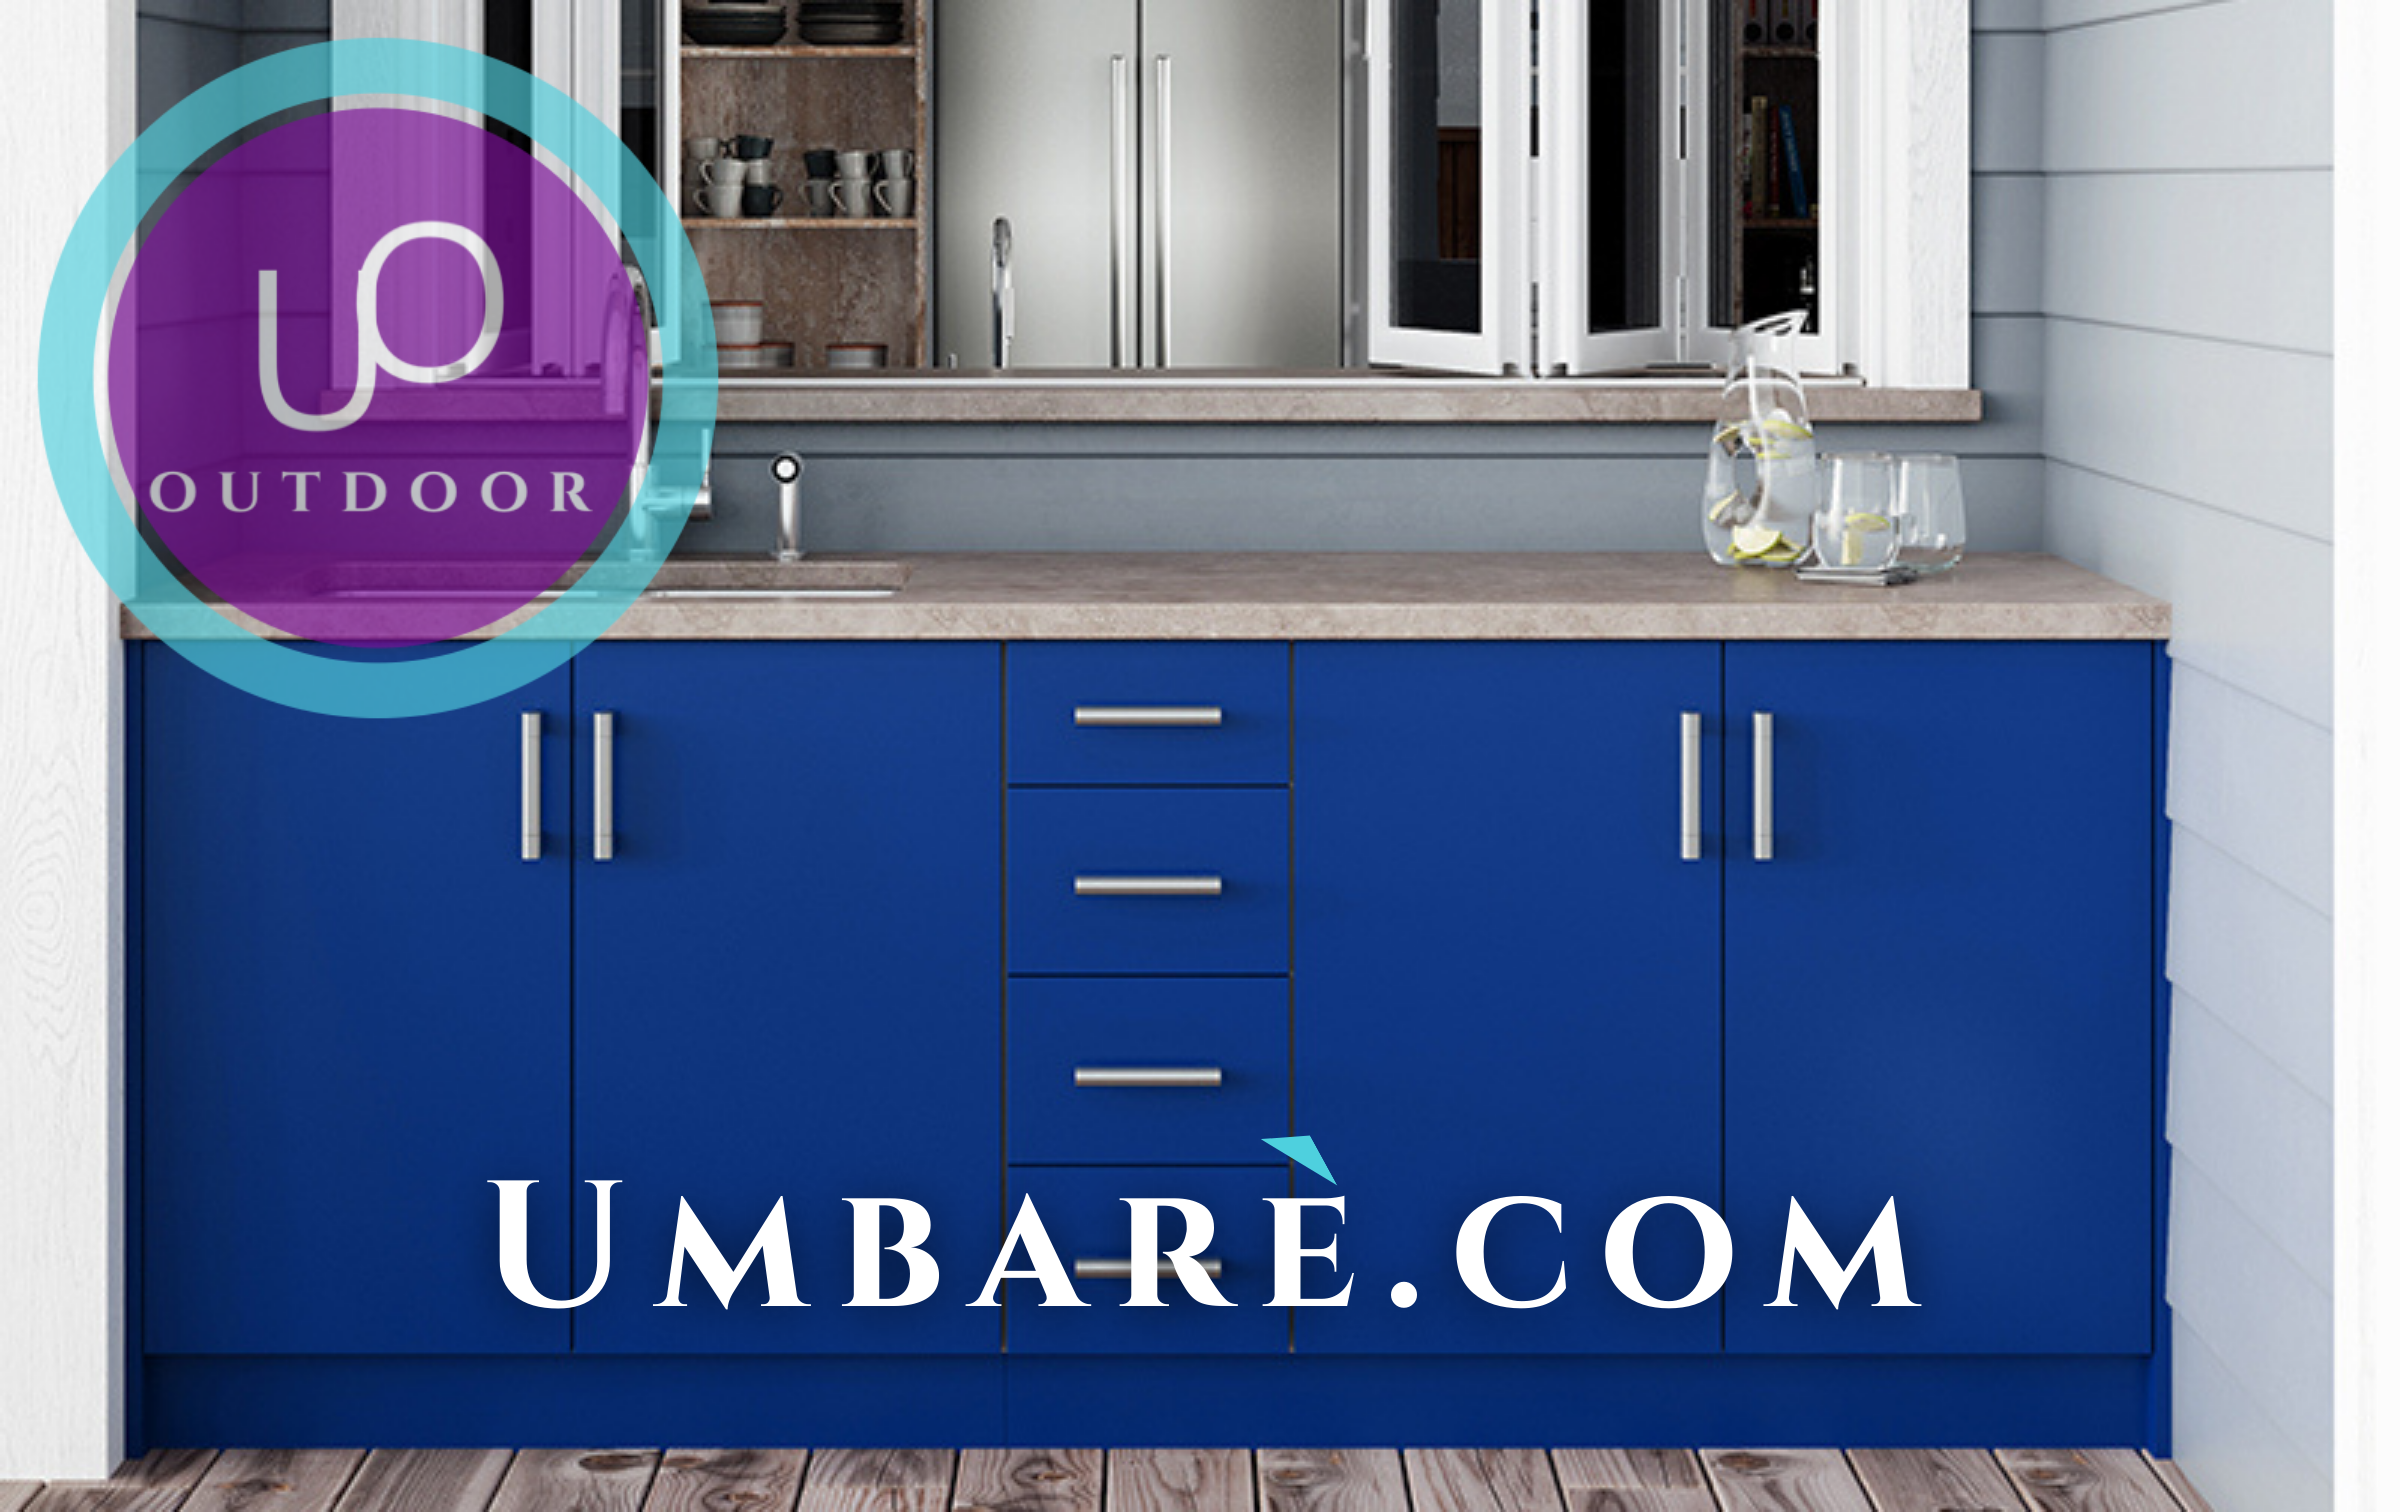 Outdoor Cabinets Reef Blue Umbare Home Remodeling Lakewood Ranch Sarasota Kitchen Bathroom Accent Wall Painting Flooring Outdoor Lakewood Ranch Remodeling Contractor